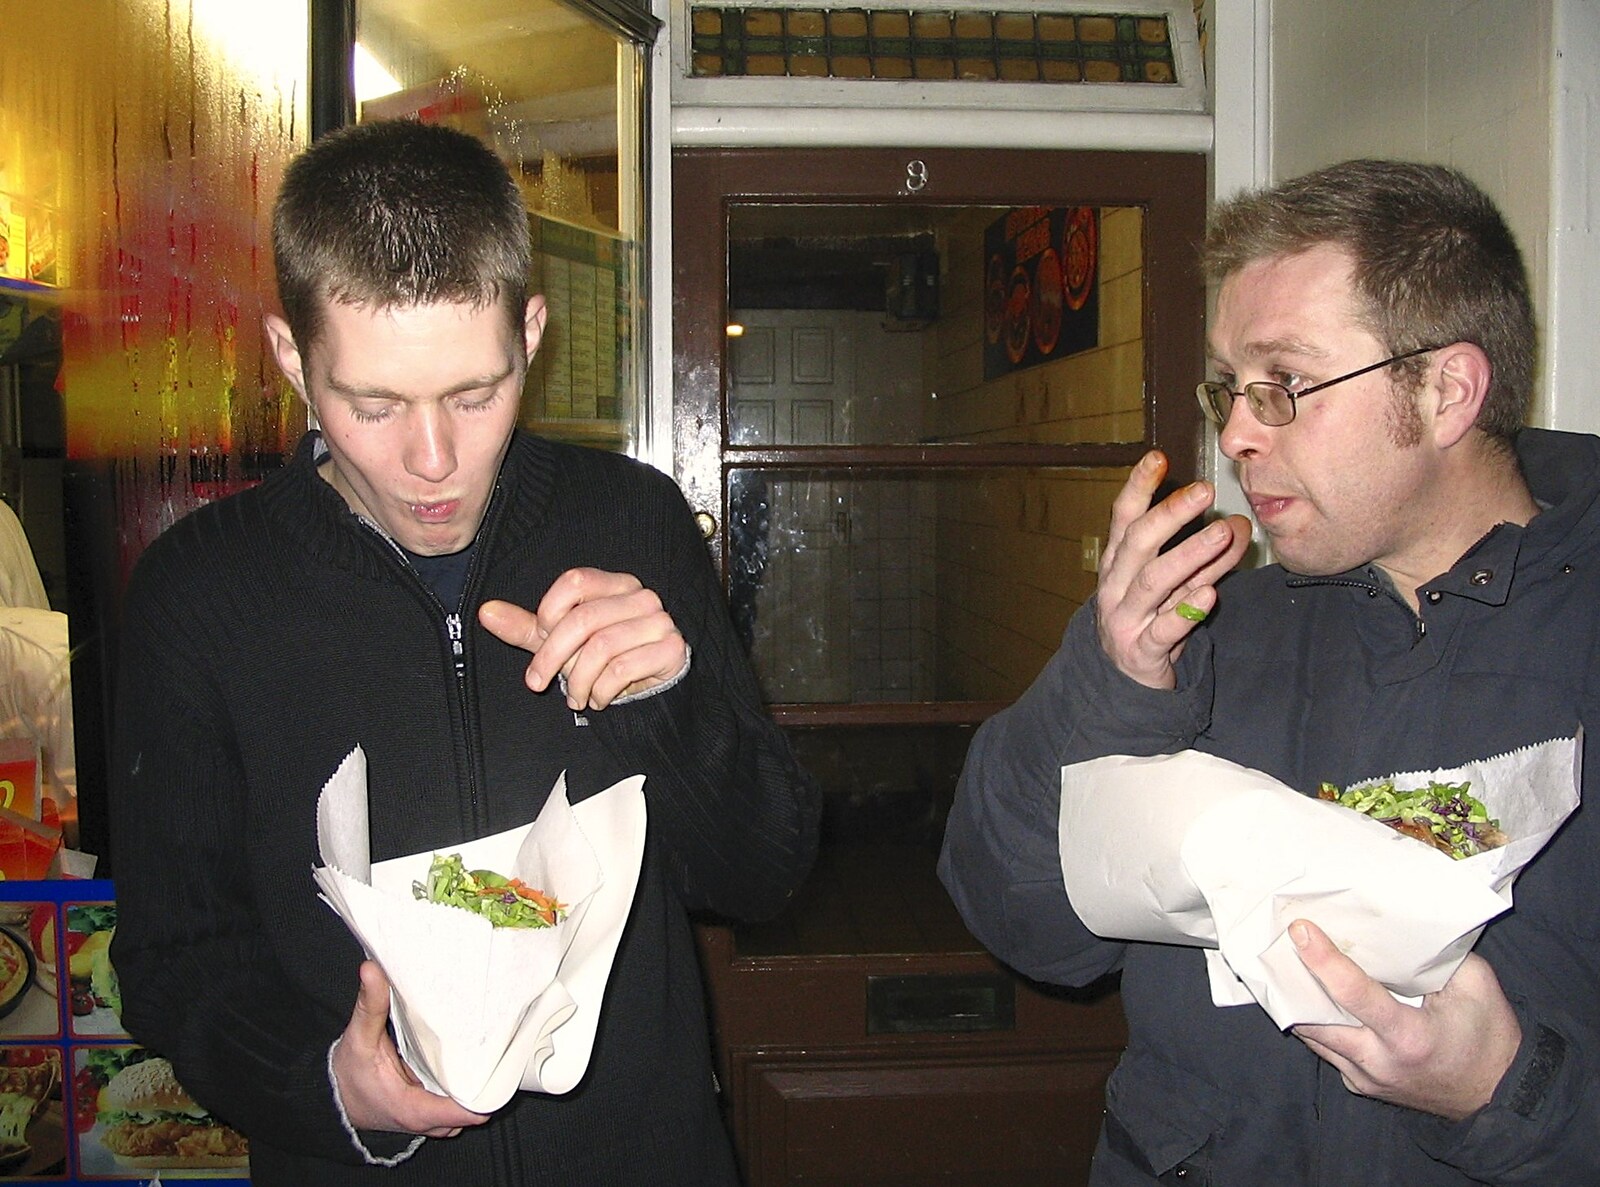 Phil and Marc on elephant-leg kebabs from Dom in da Chapel, Safeway Chickens and Evil Supermarkets, Harleston and Grimston - 15th January 2006